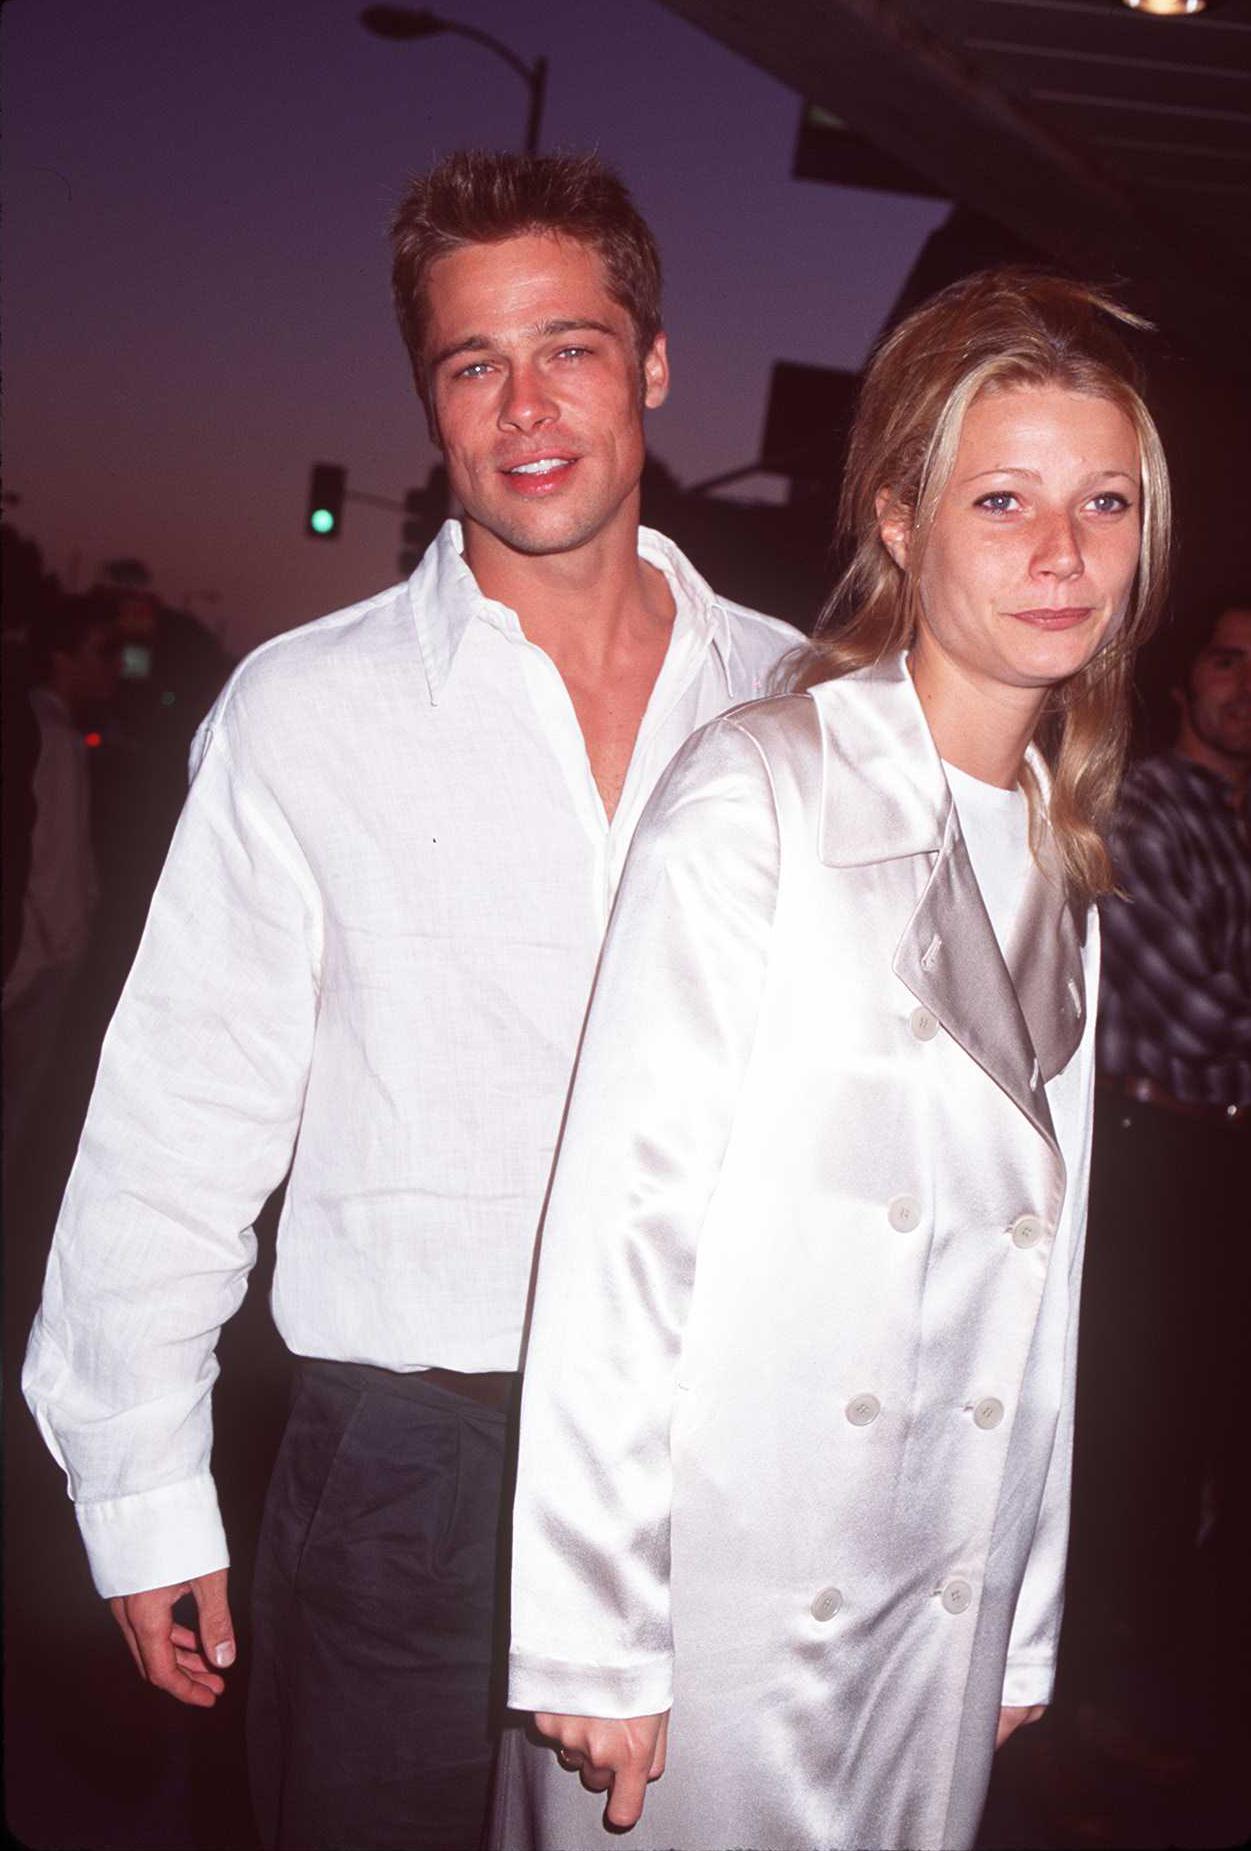 Pitt and Gwyneth Paltrow began seeing each other while filming Se7en in the pre-Goop era of 1995. The couple also got engaged but broke up 2 years later.